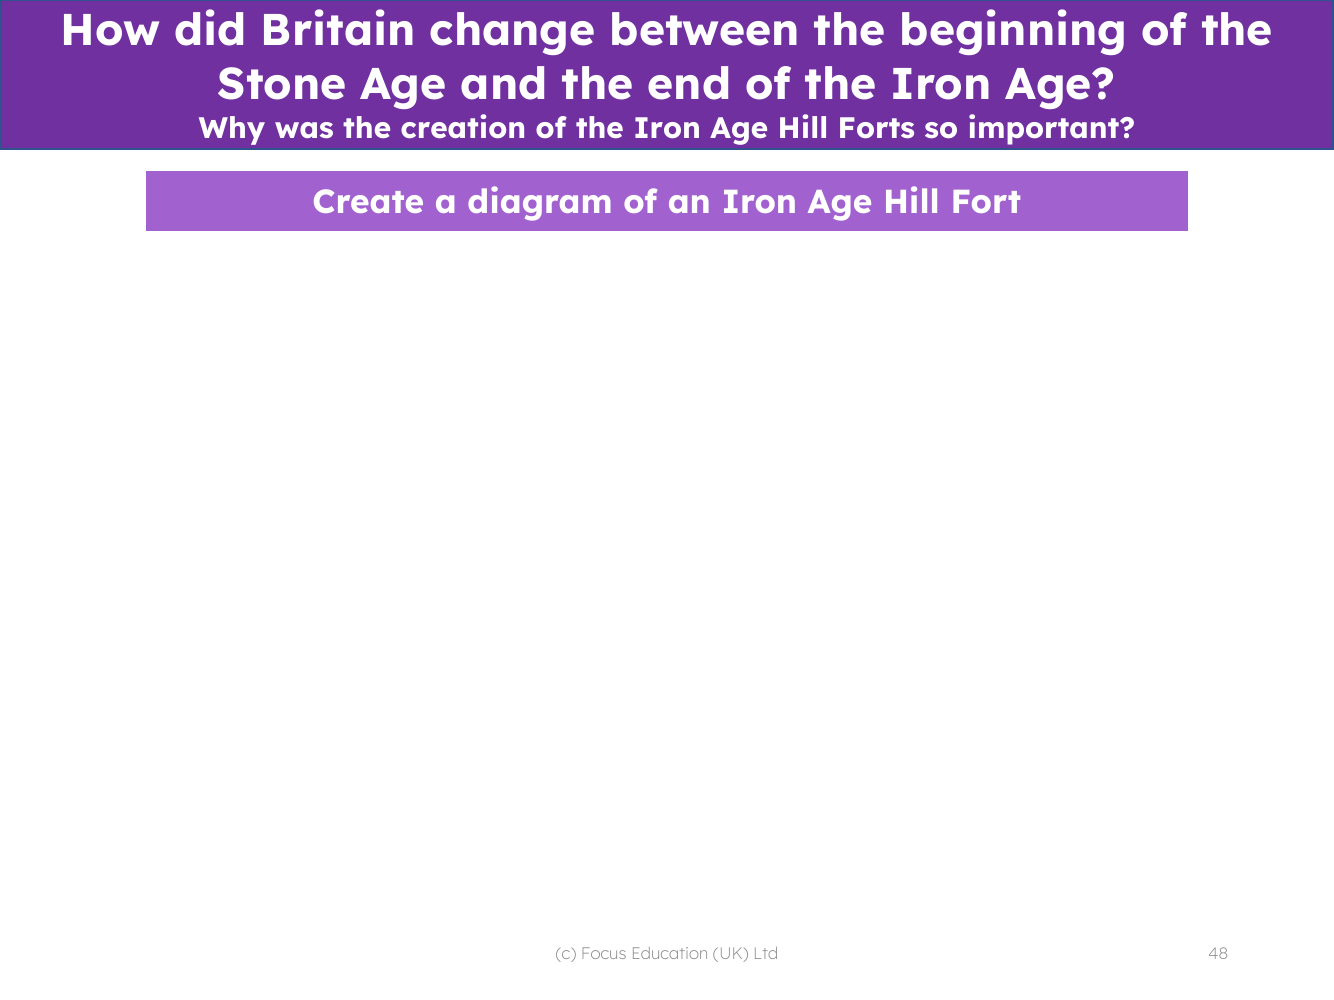 Create a diagram of a hill fort